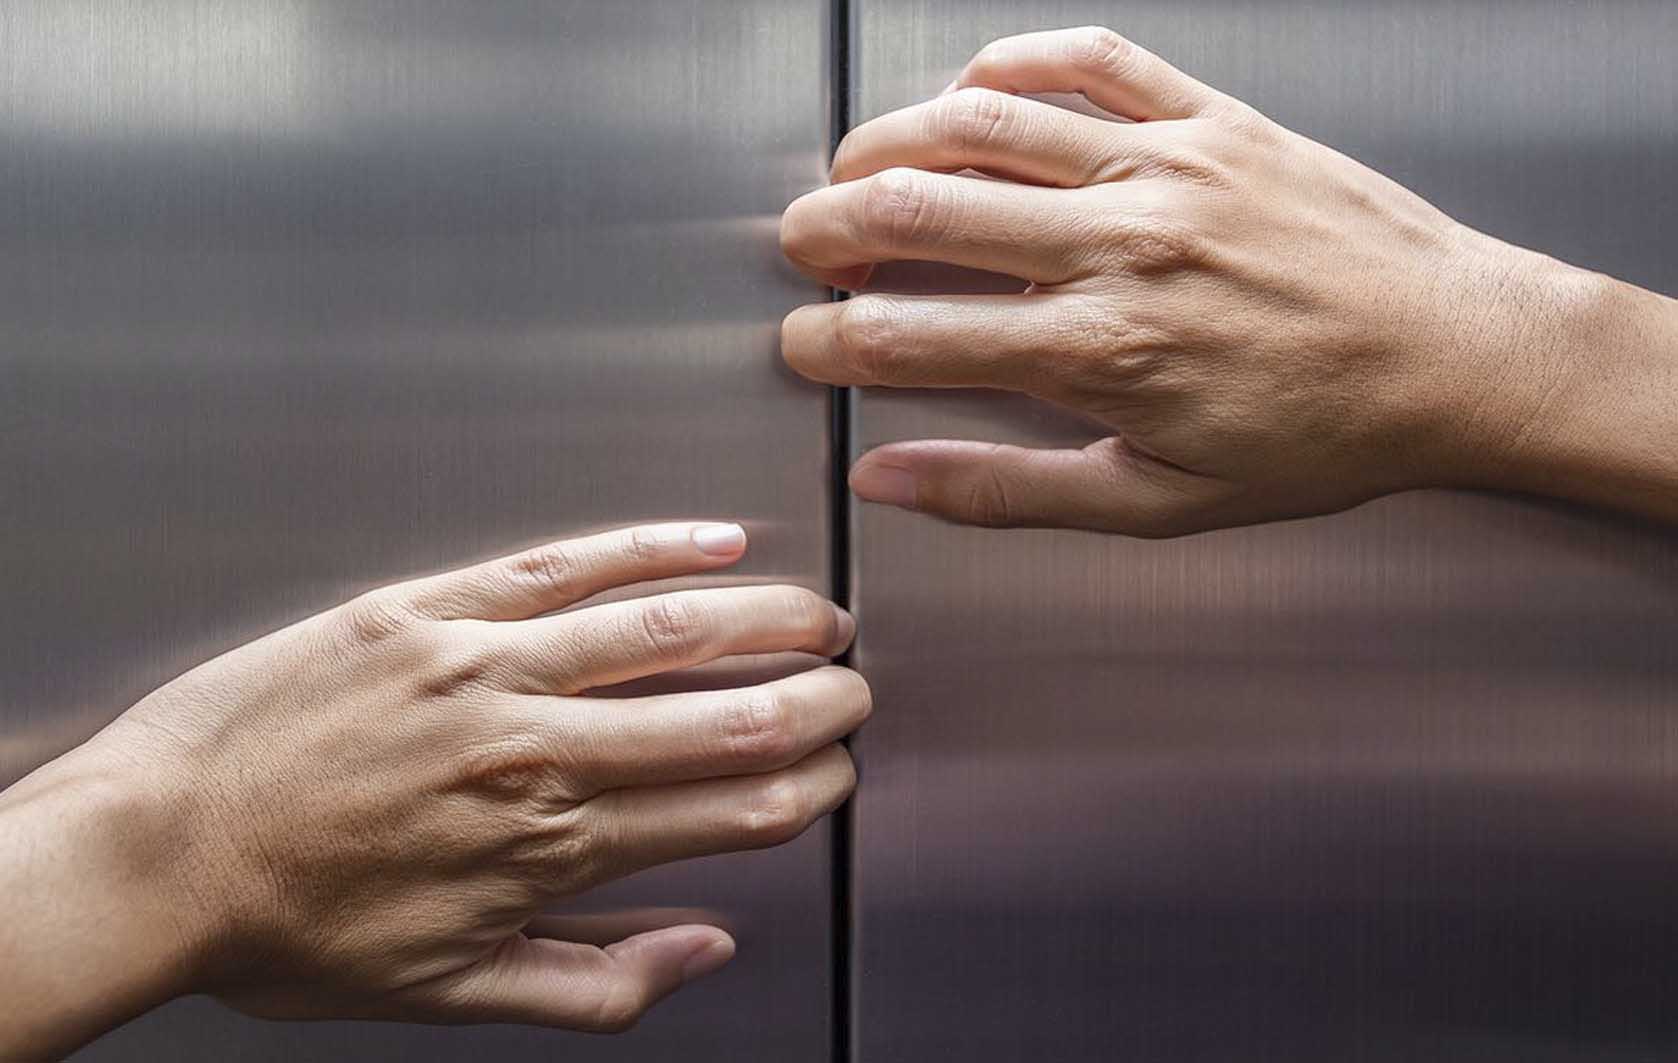 Have you ever been caught or trapped in a lift?